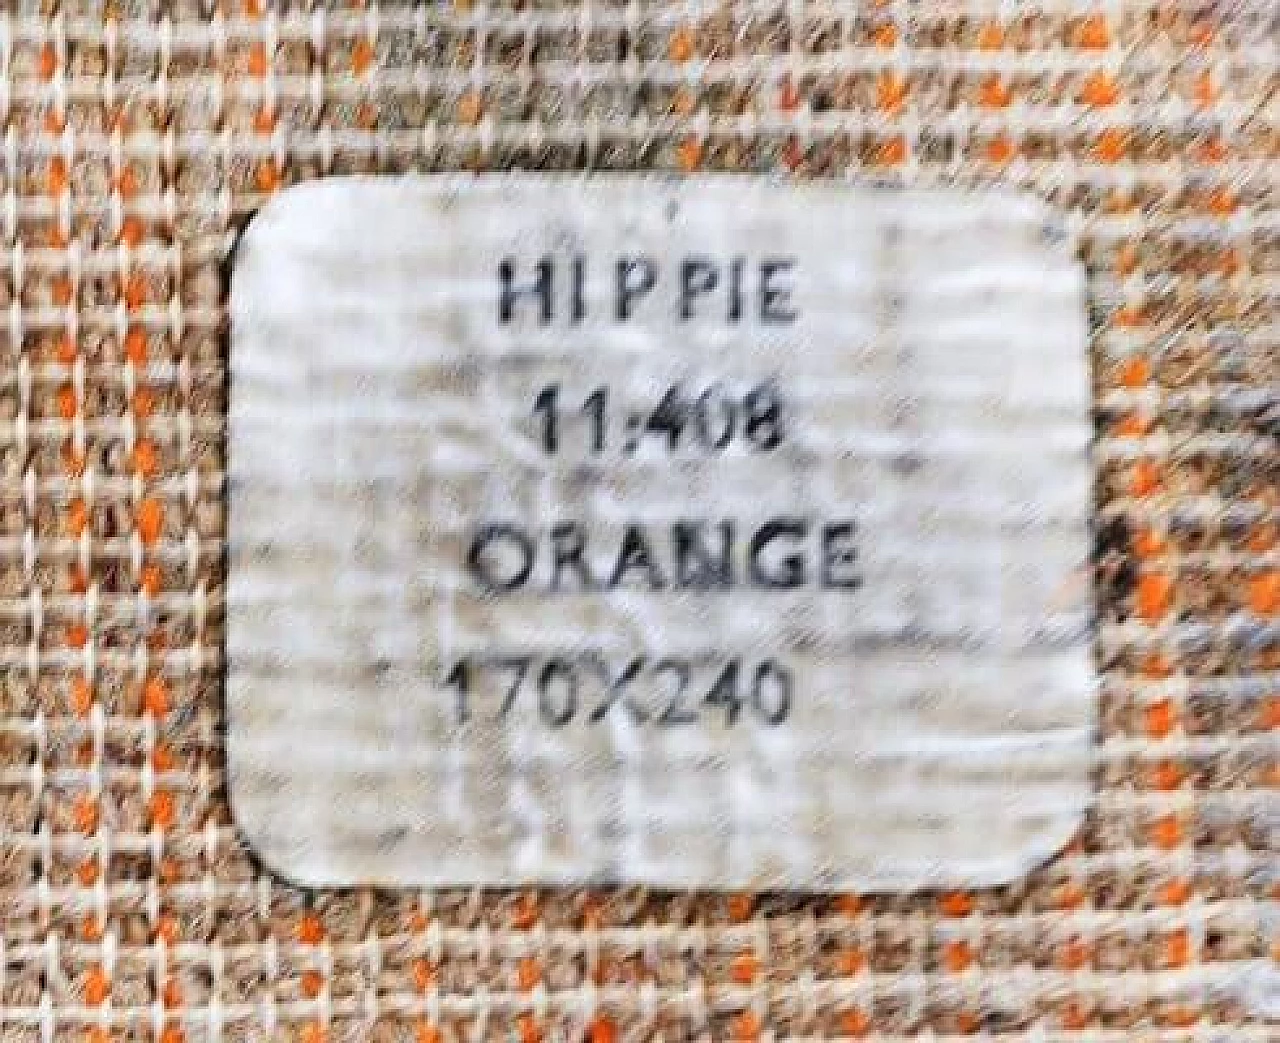 Red and orange Hippie wool rug, 1970s 4